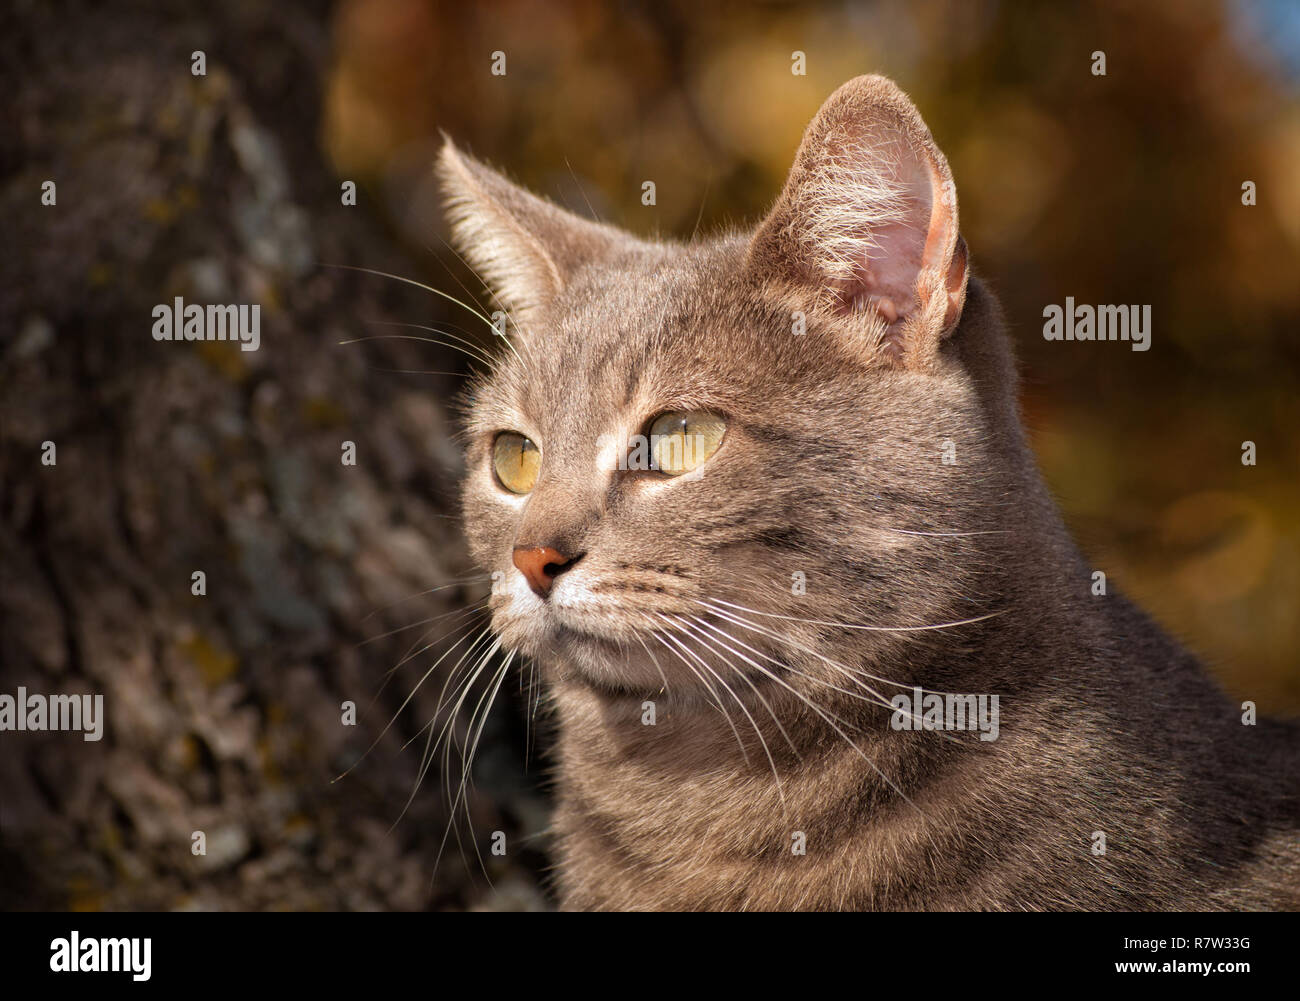 Closeup image of a blue tabby cat up in a tree; muted autumn colors on background Stock Photo